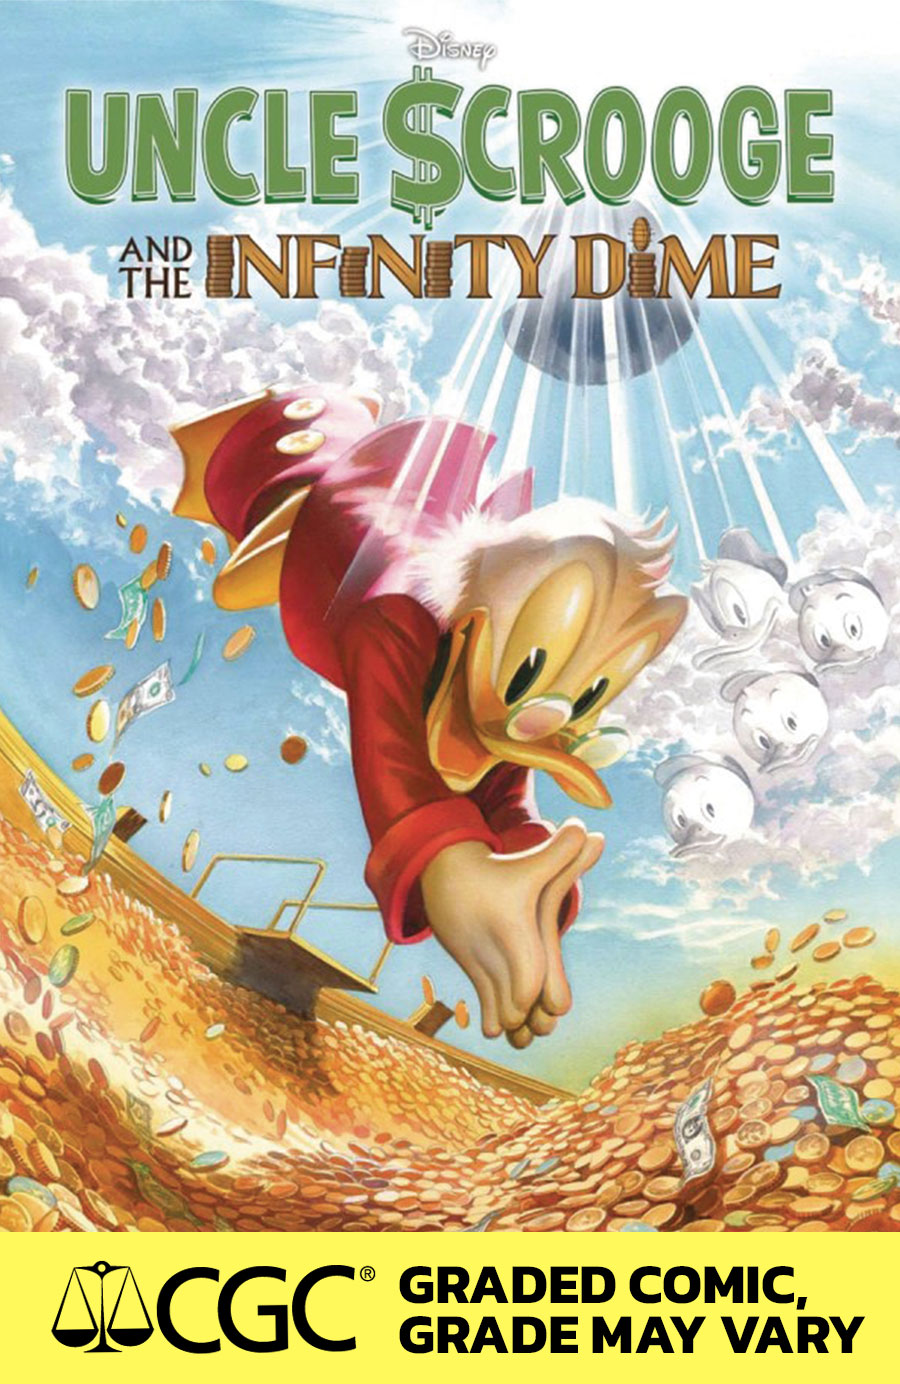 Uncle Scrooge And The Infinity Dime #1 (One Shot) Cover O Df Alex Ross Variant Cover CGC Graded 9.6 Or Higher